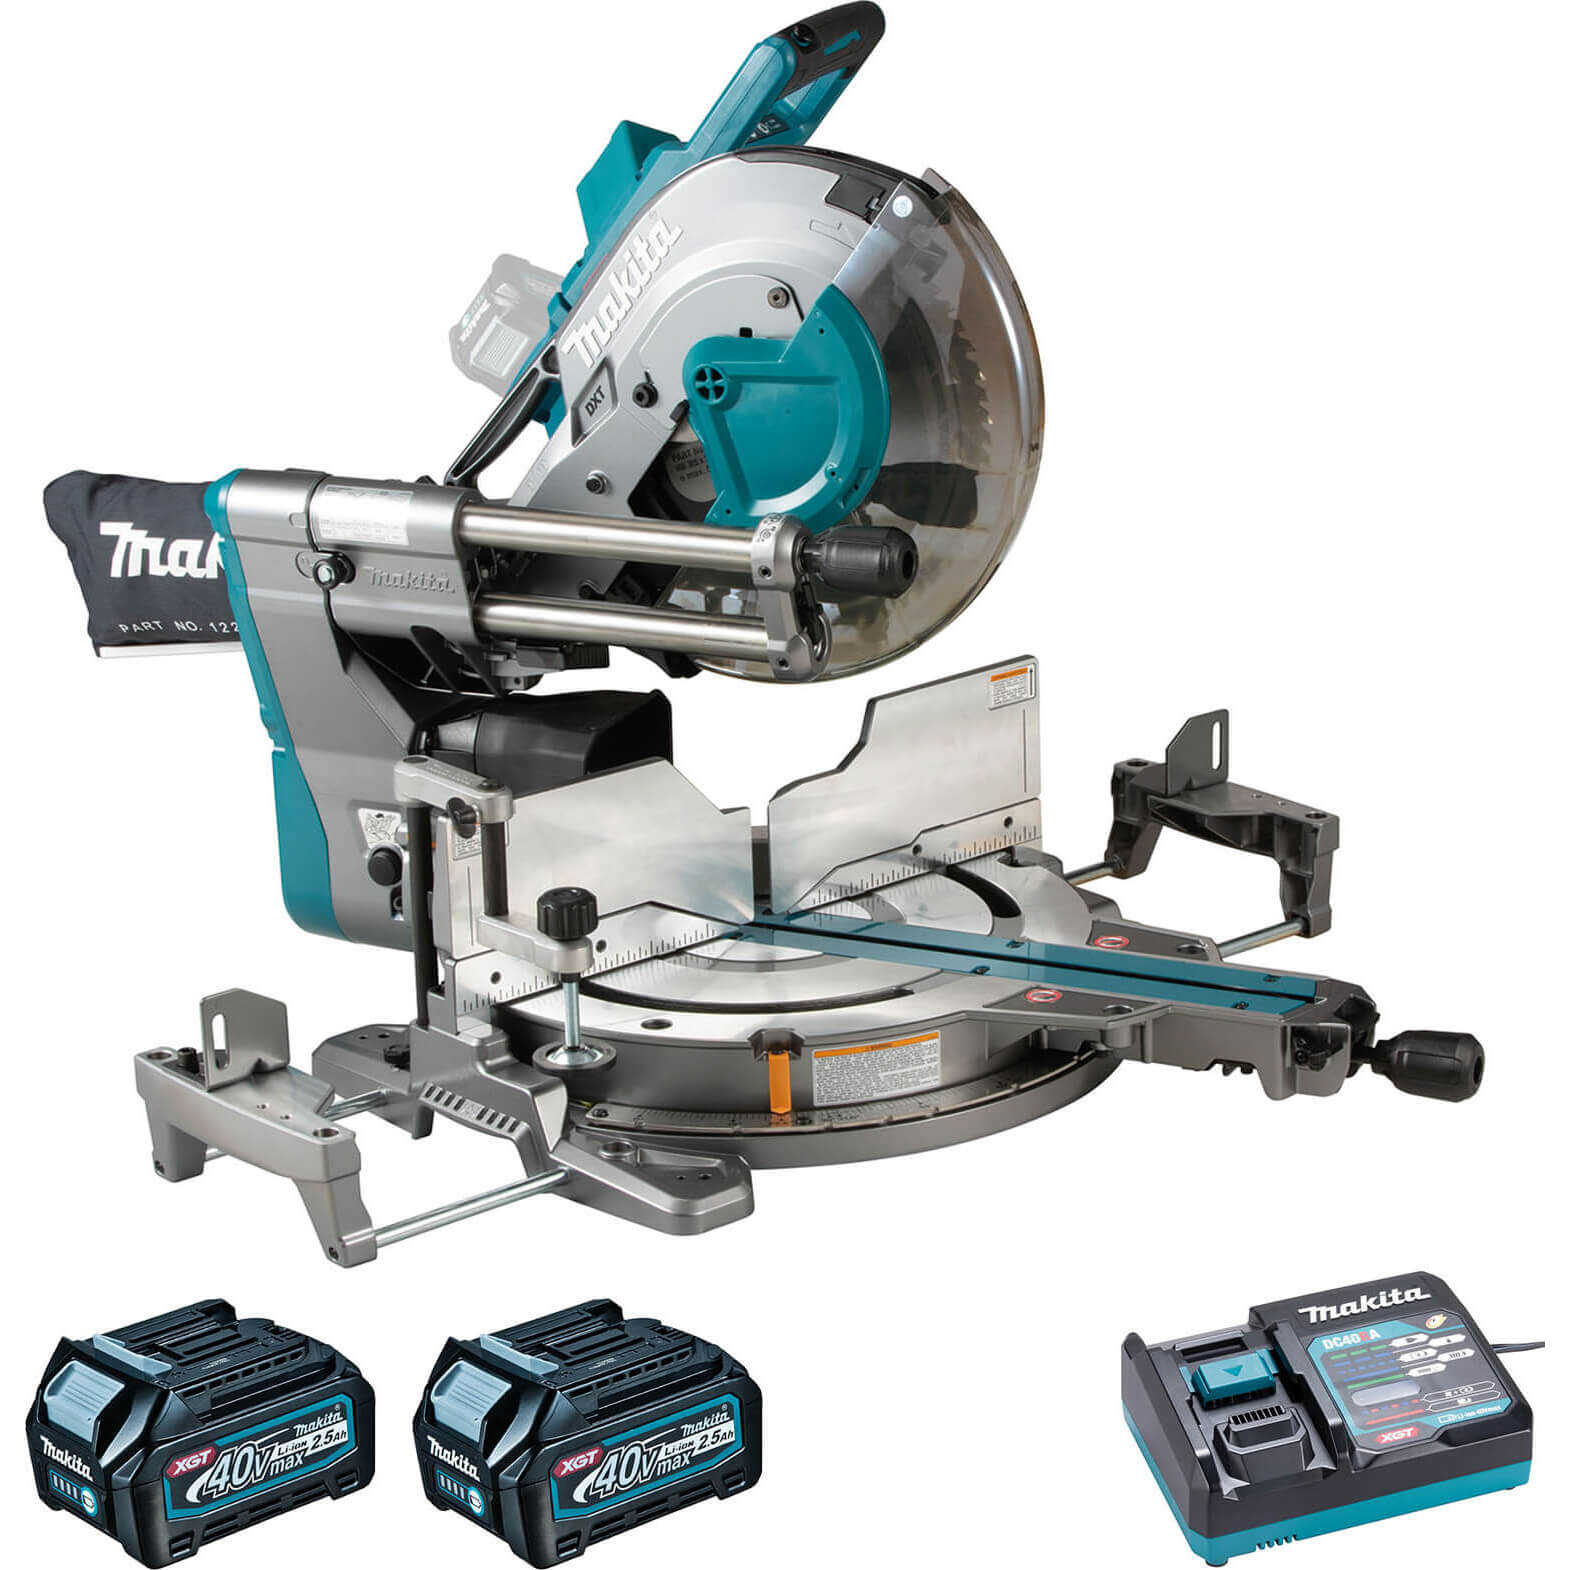 Image of Makita LS003G 40v Max XGT Cordless Brushless Slide Compound Mitre Saw 305mm 2 x 2.5ah Li-ion Charger No Case